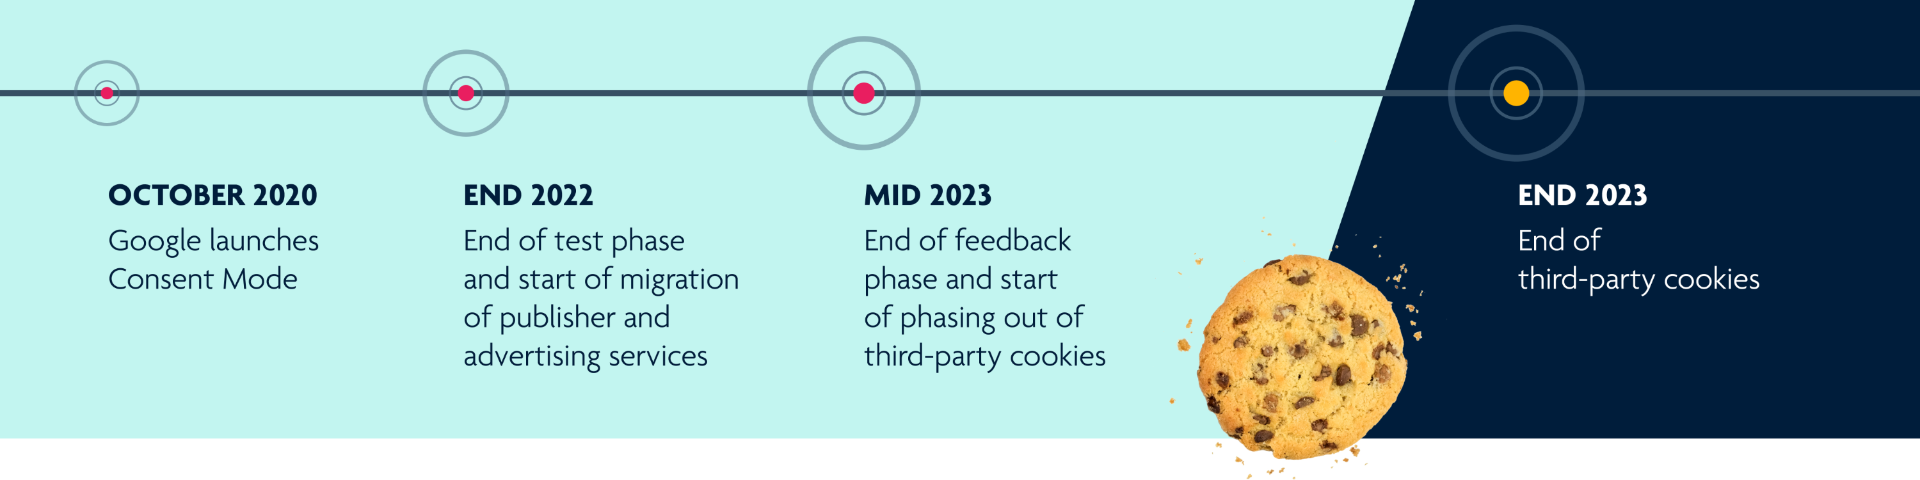 The end of the cookie era 2023 | Advertising without third-party tracking